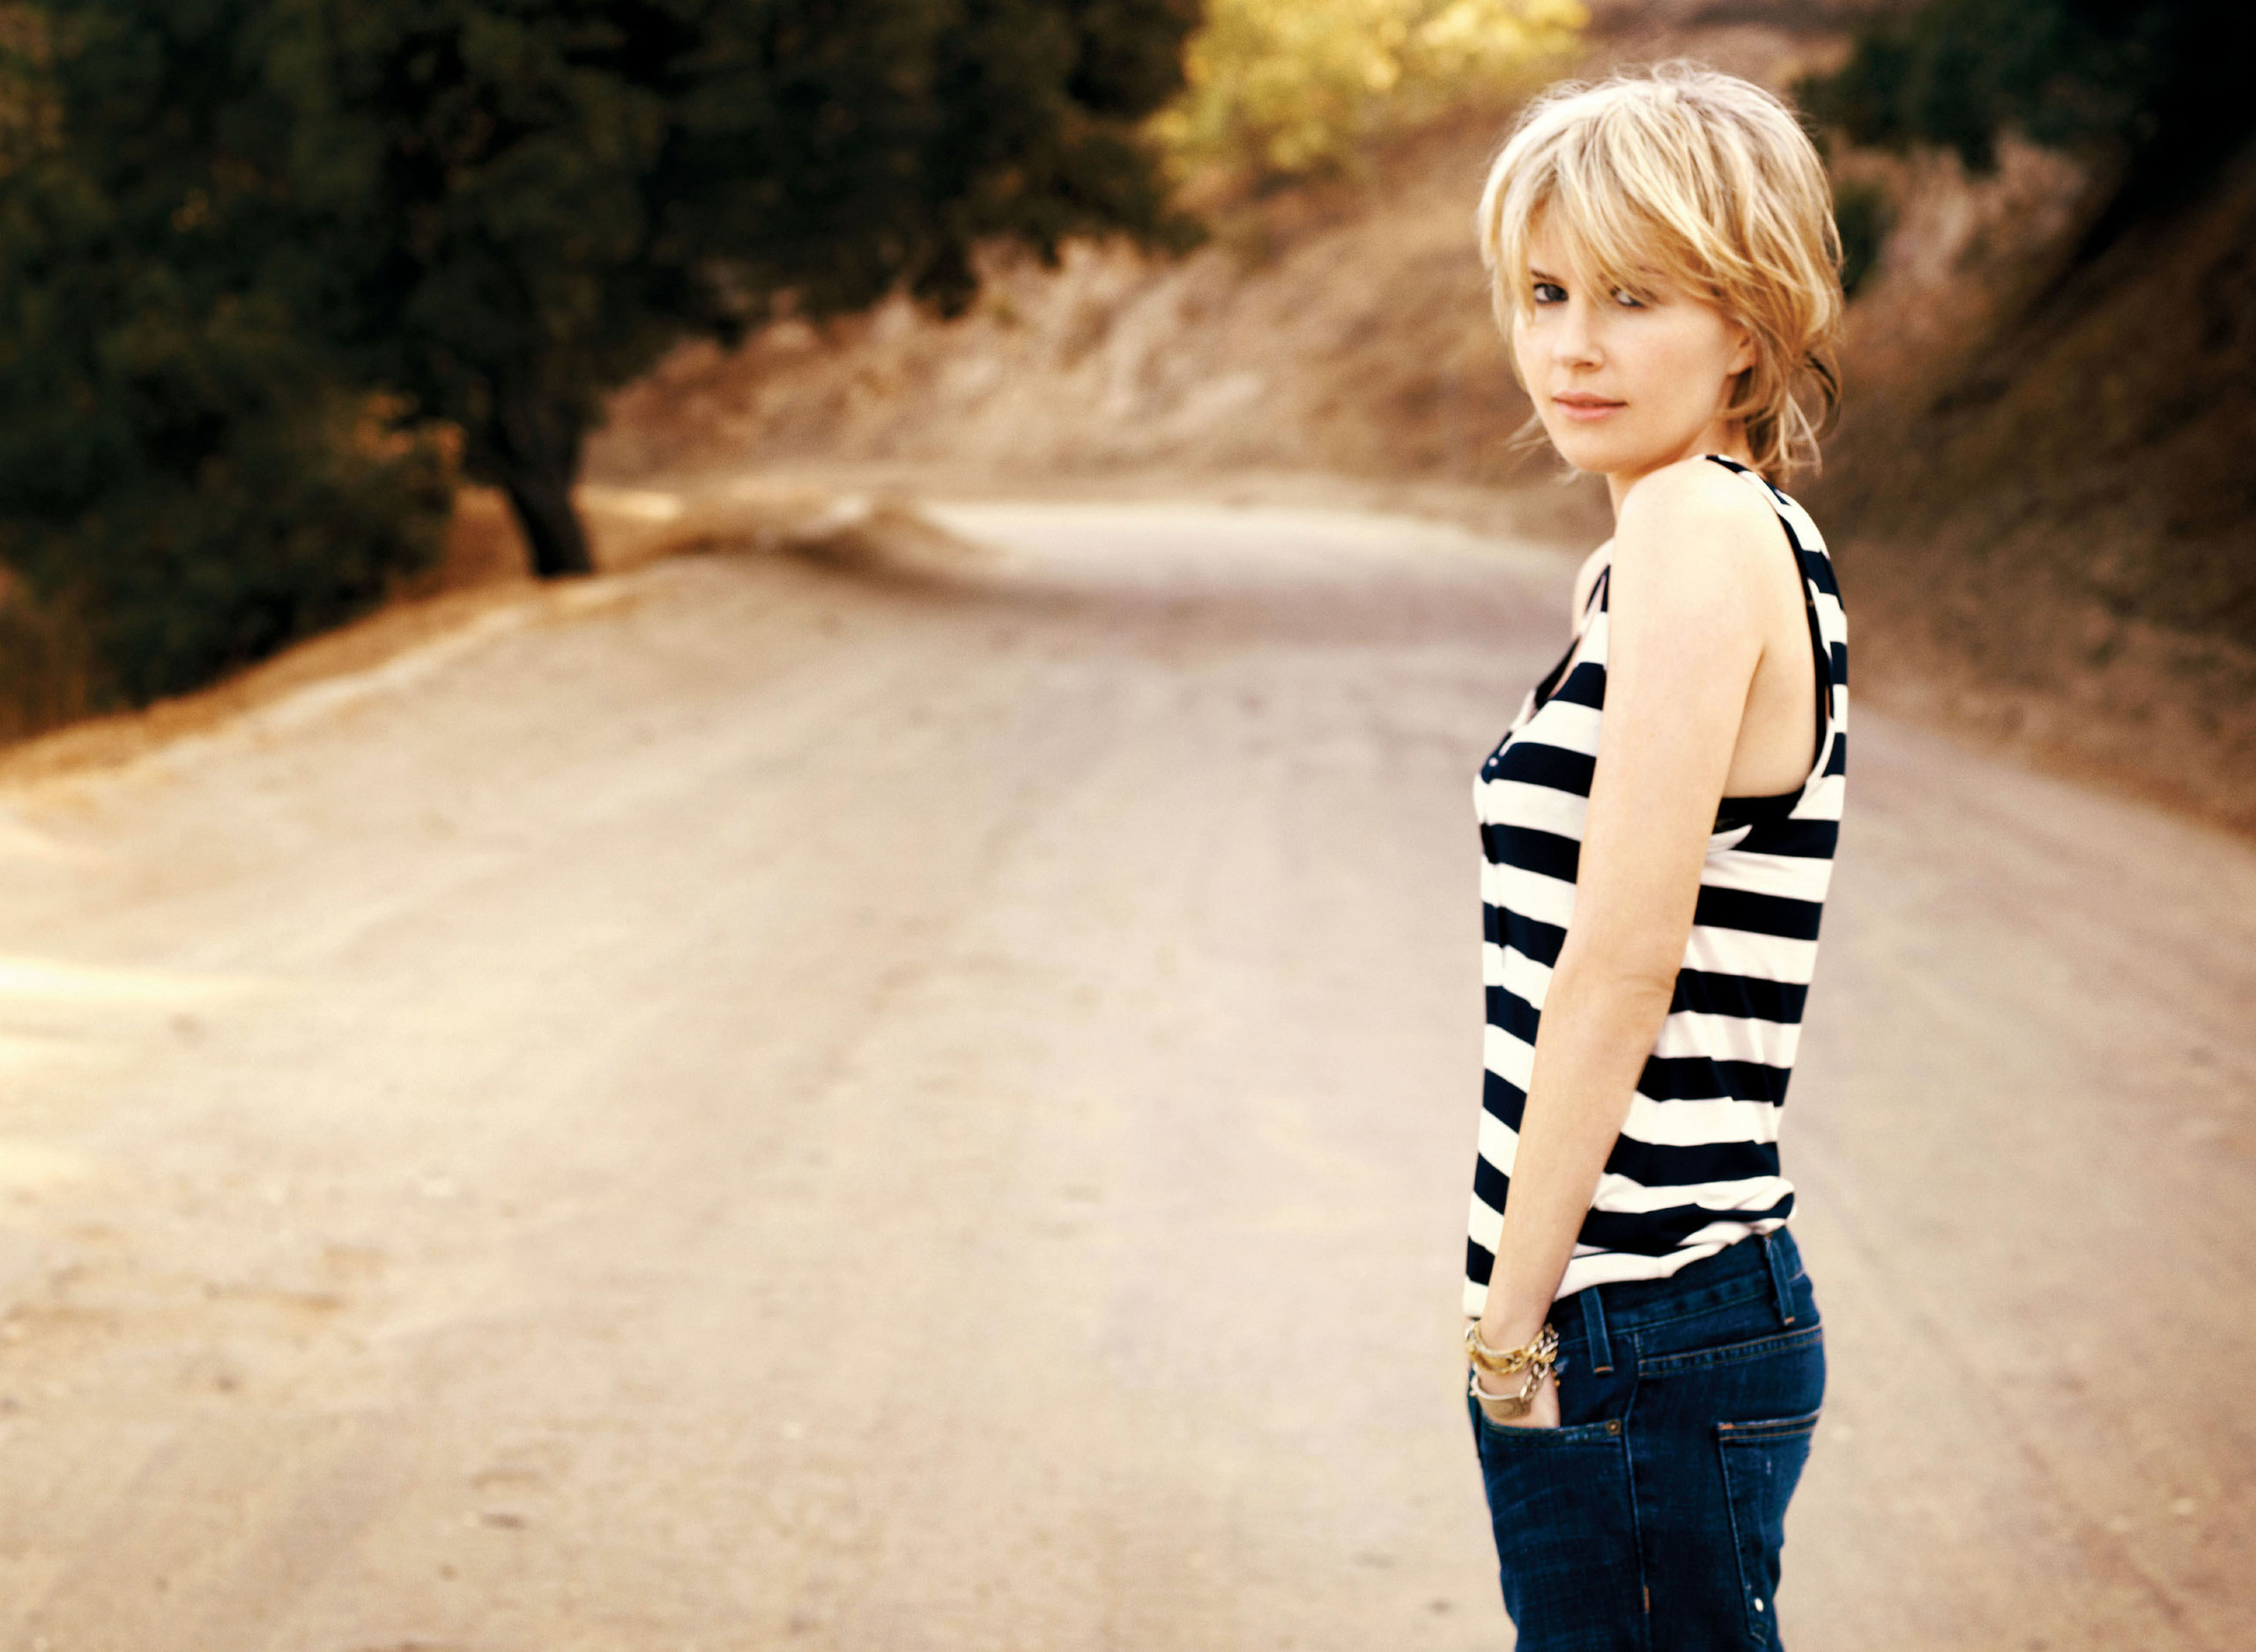 Dido - Wallpaper Colection